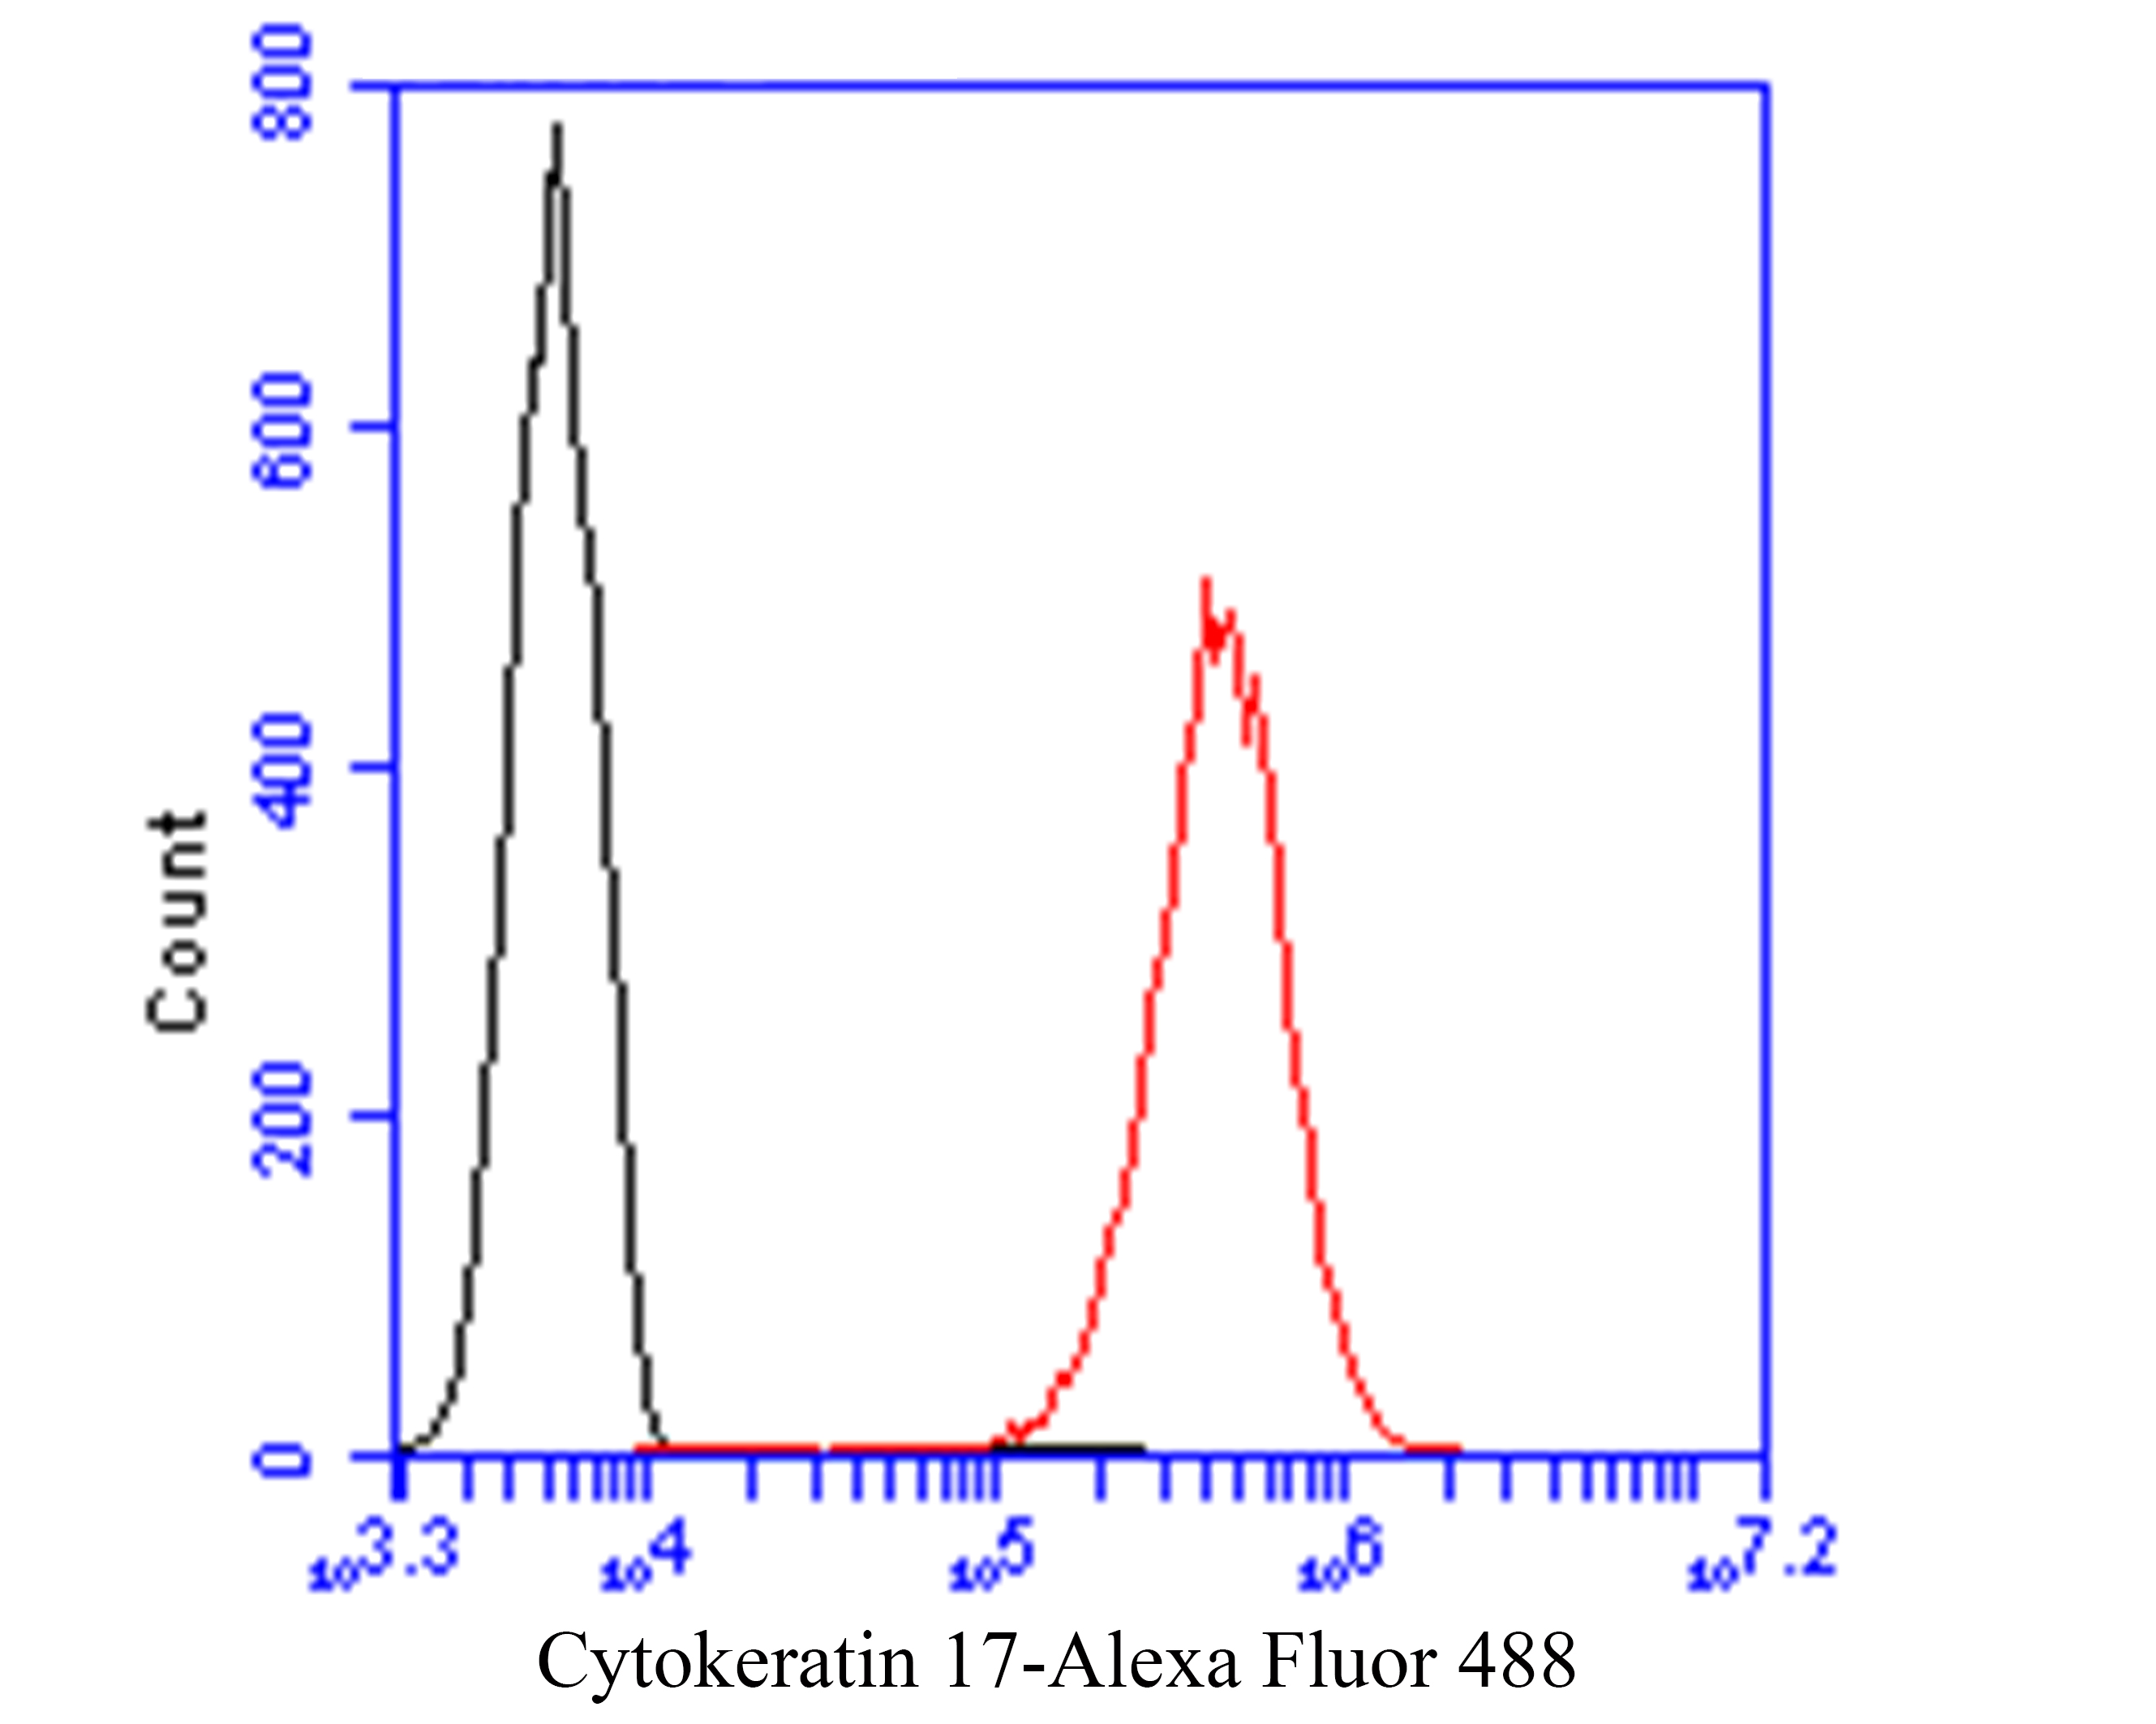 Flow cytometric analysis of Cytokeratin 17 was done on SiHa cells. The cells were fixed, permeabilized and stained with the primary antibody (ER1901-18, 1/50) (red). After incubation of the primary antibody at room temperature for an hour, the cells were stained with a Alexa Fluor 488-conjugated Goat anti-Rabbit IgG Secondary antibody at 1/1000 dilution for 30 minutes.Unlabelled sample was used as a control (cells without incubation with primary antibody; black).